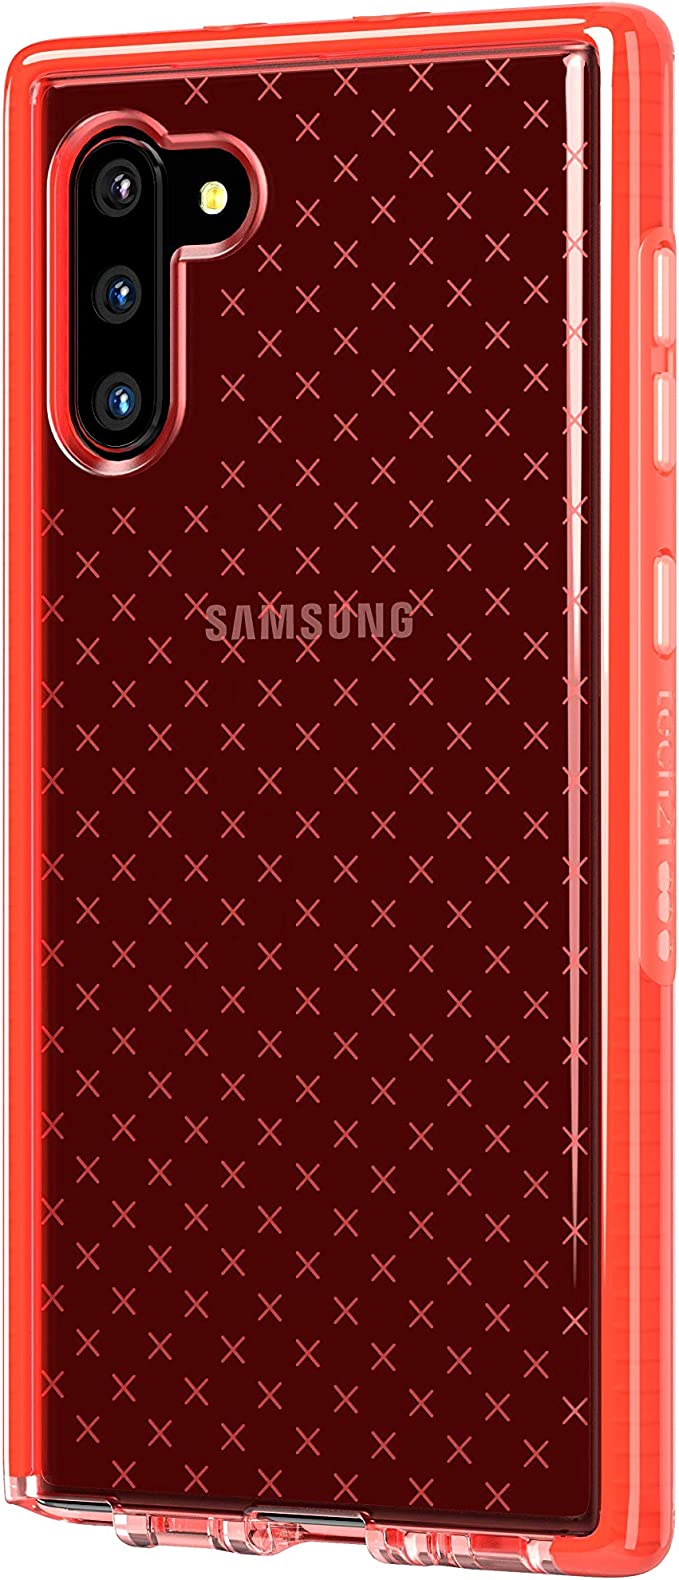 Tech21 Evo Check Phone Protector Case for Samsung Galaxy Note10 - Coral